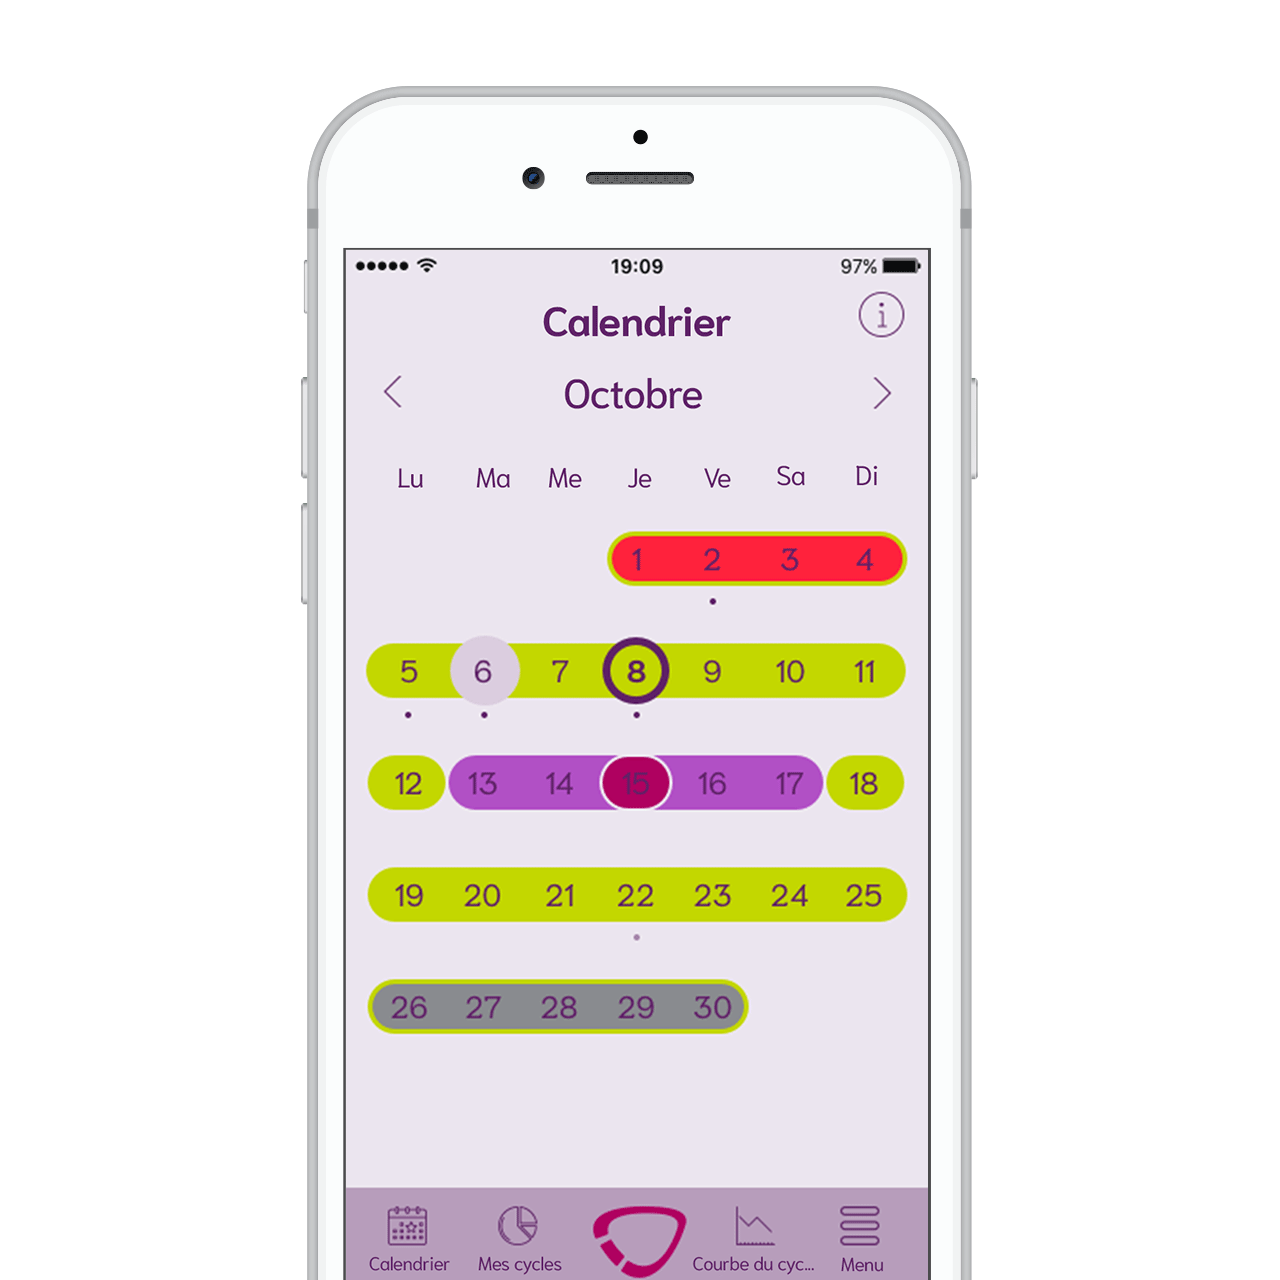 cyclotest mySense - calendrier